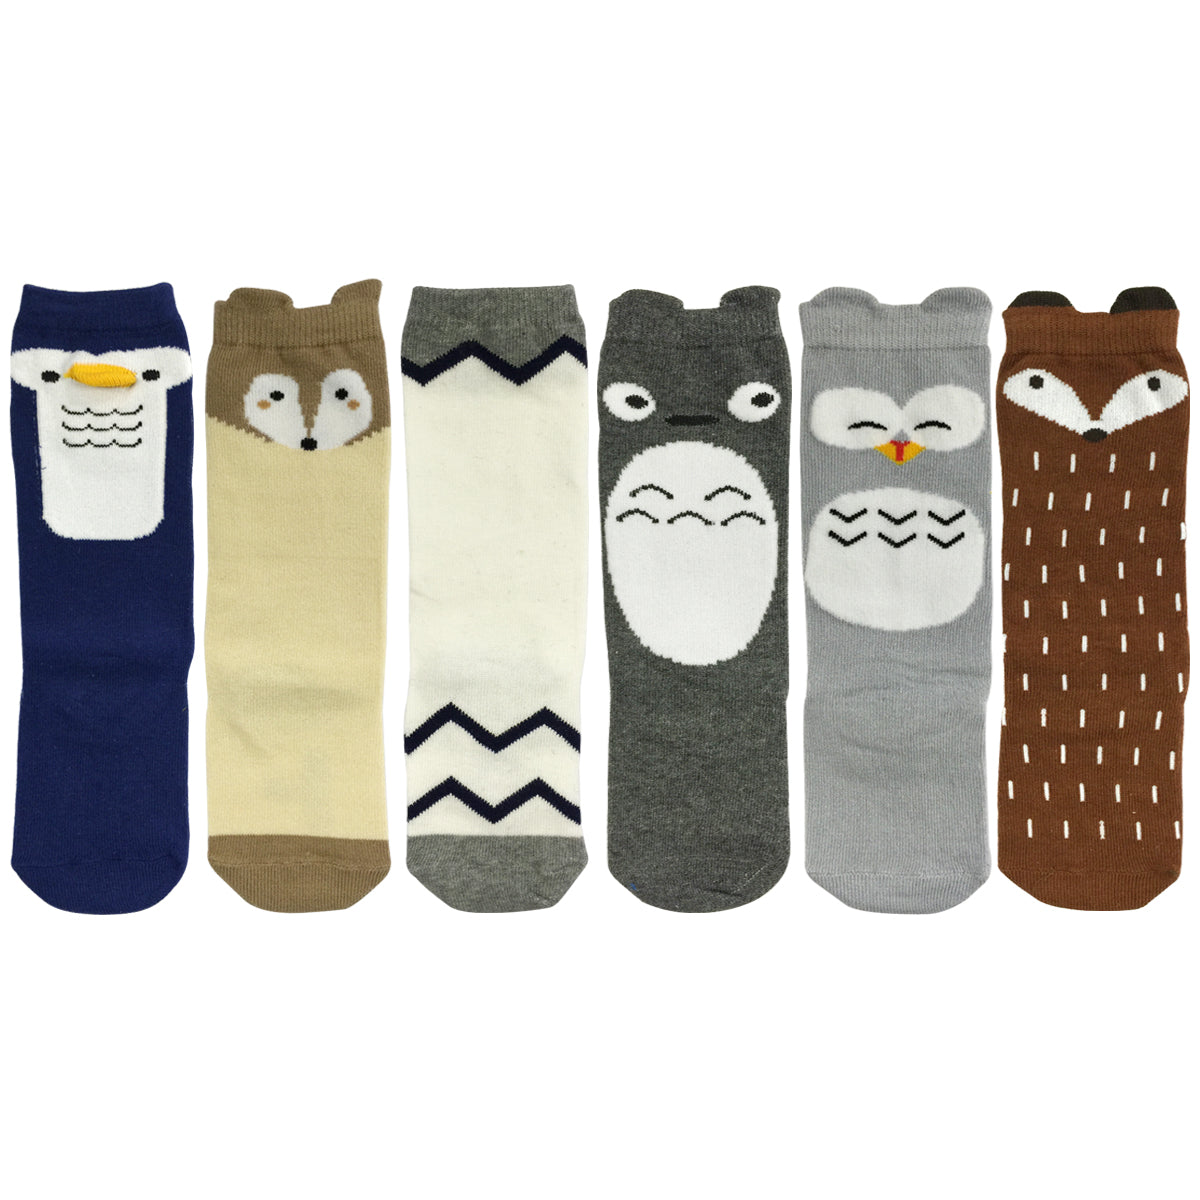 Wrapables My Best Buddy Socks for Baby (Set of 6), Arctic Buddies (1-3)